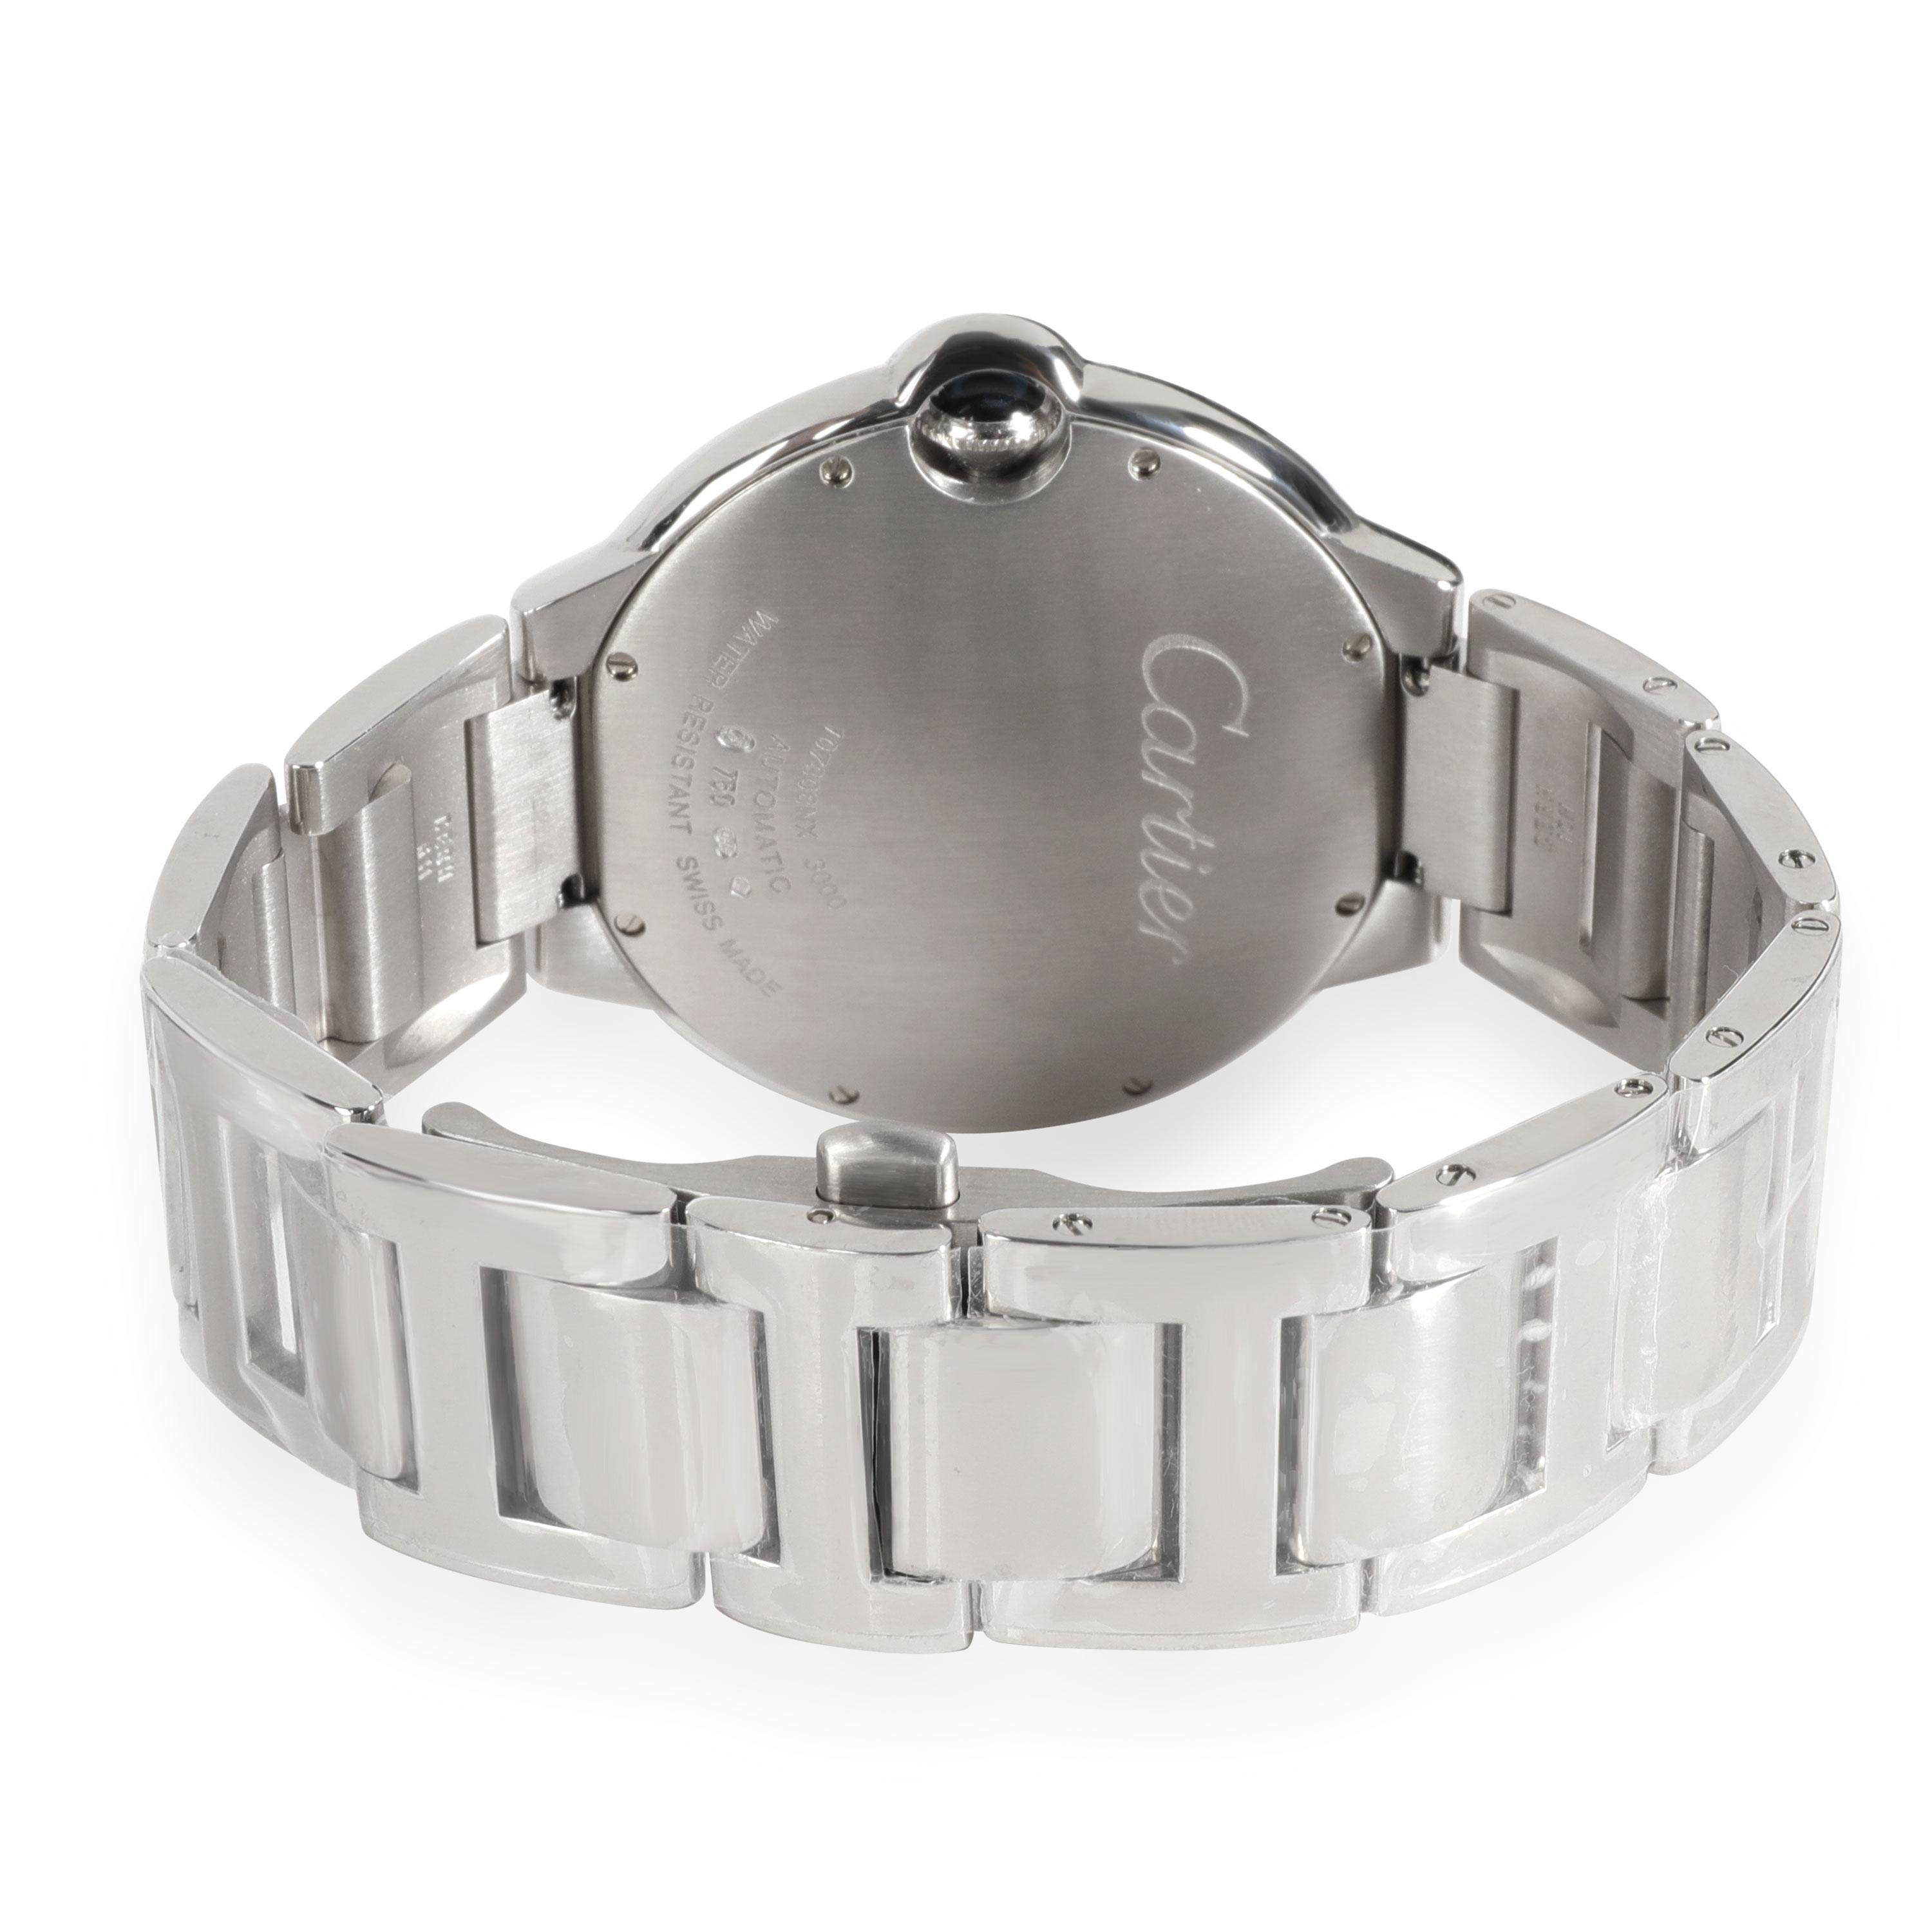 Cartier Ballon Bleu WE9009Z3 Men's Watch in 18kt White Gold

SKU: 110877

PRIMARY DETAILS
Brand:  Cartier
Model: Ballon Bleu
Country of Origin: Switzerland
Movement Type: Mechanical: Automatic/Kinetic
Year Manufactured: 
Year of Manufacture: